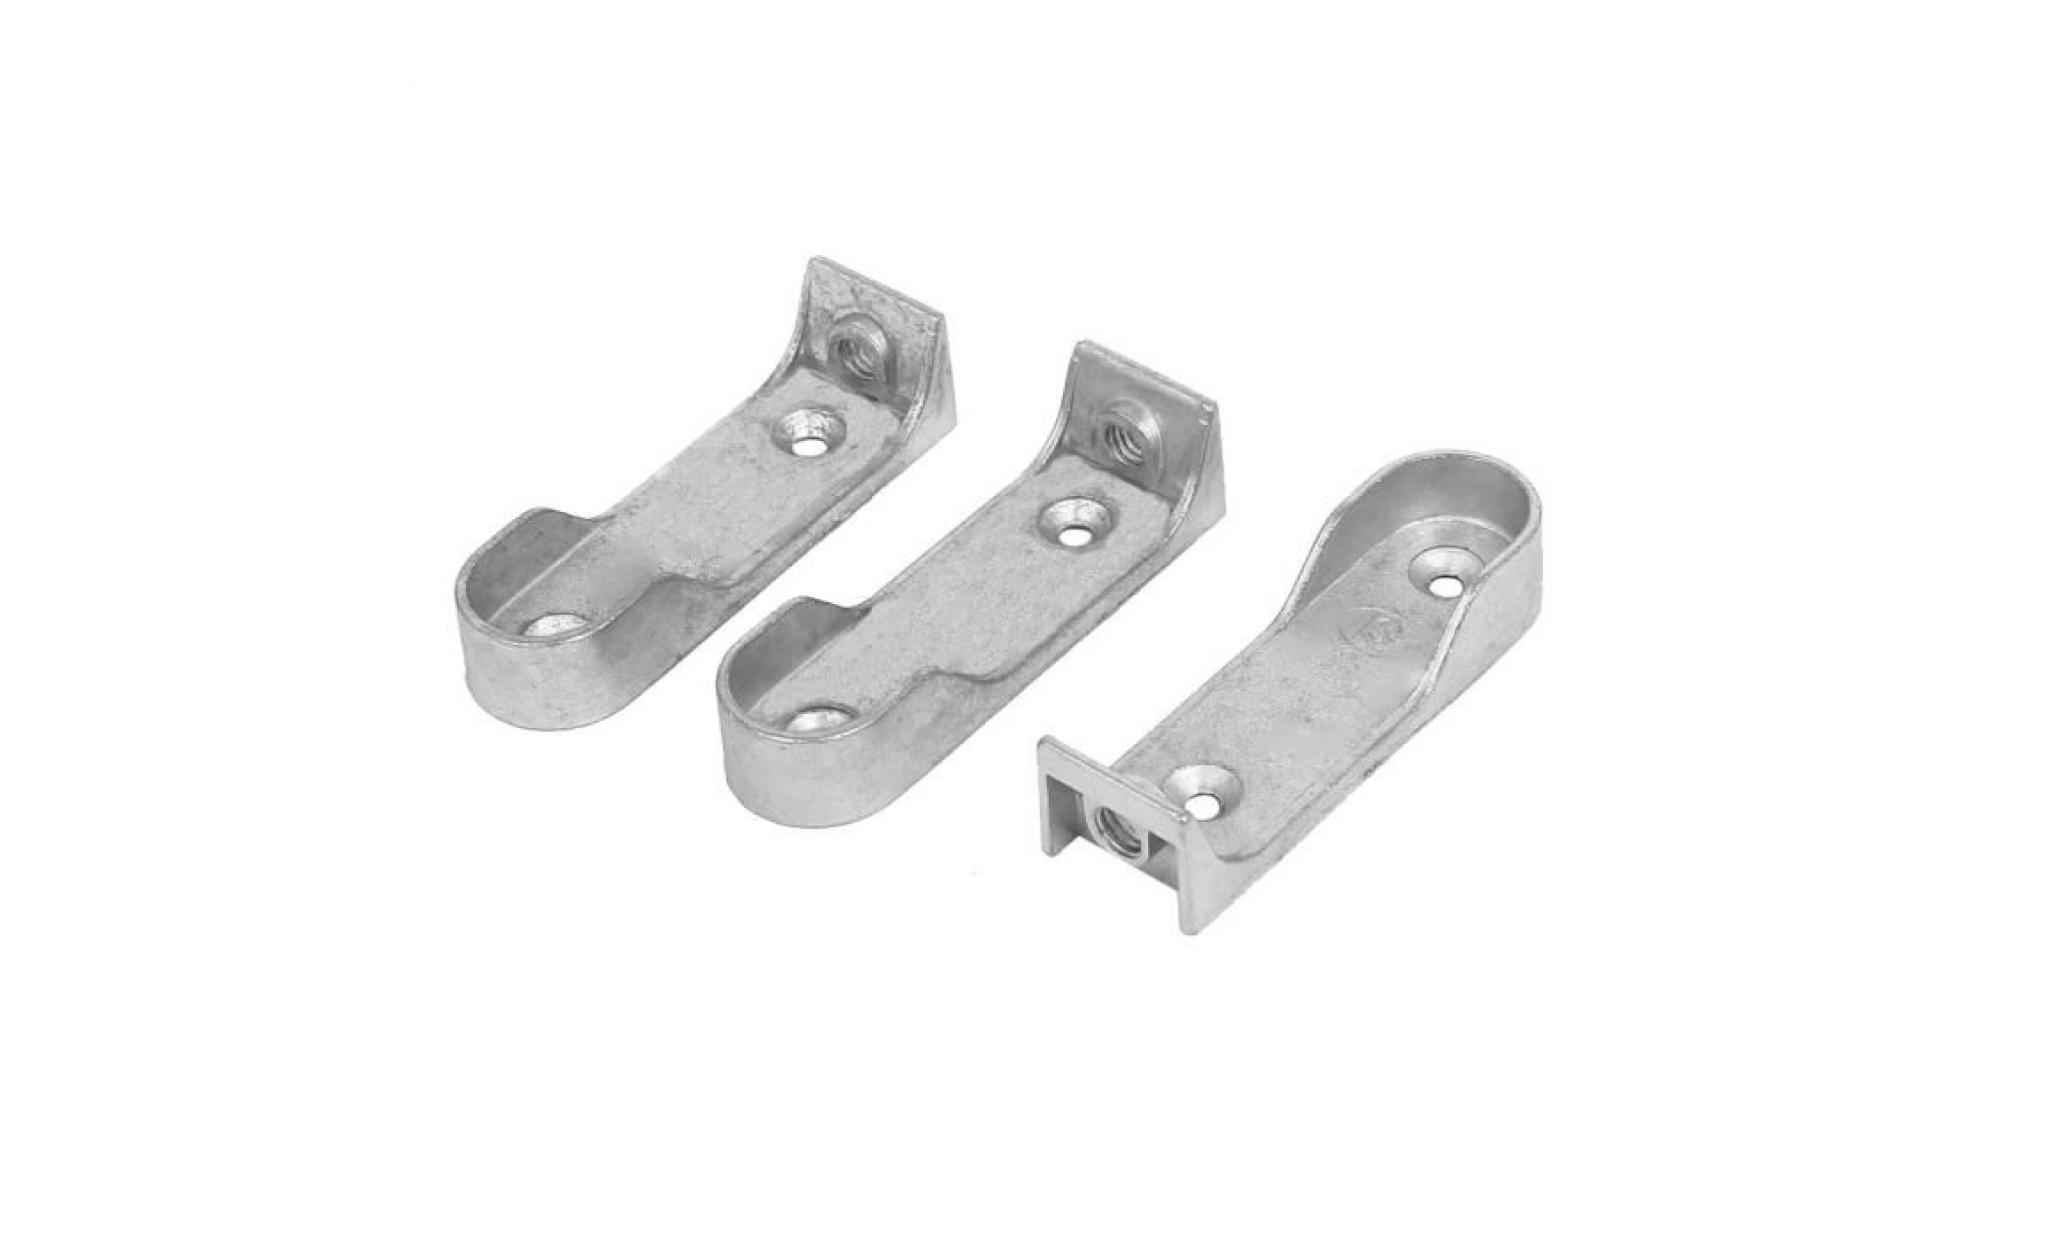 wardrobe rod end rail supports brackets holder silver tone 3pcs for 16mm tube pas cher